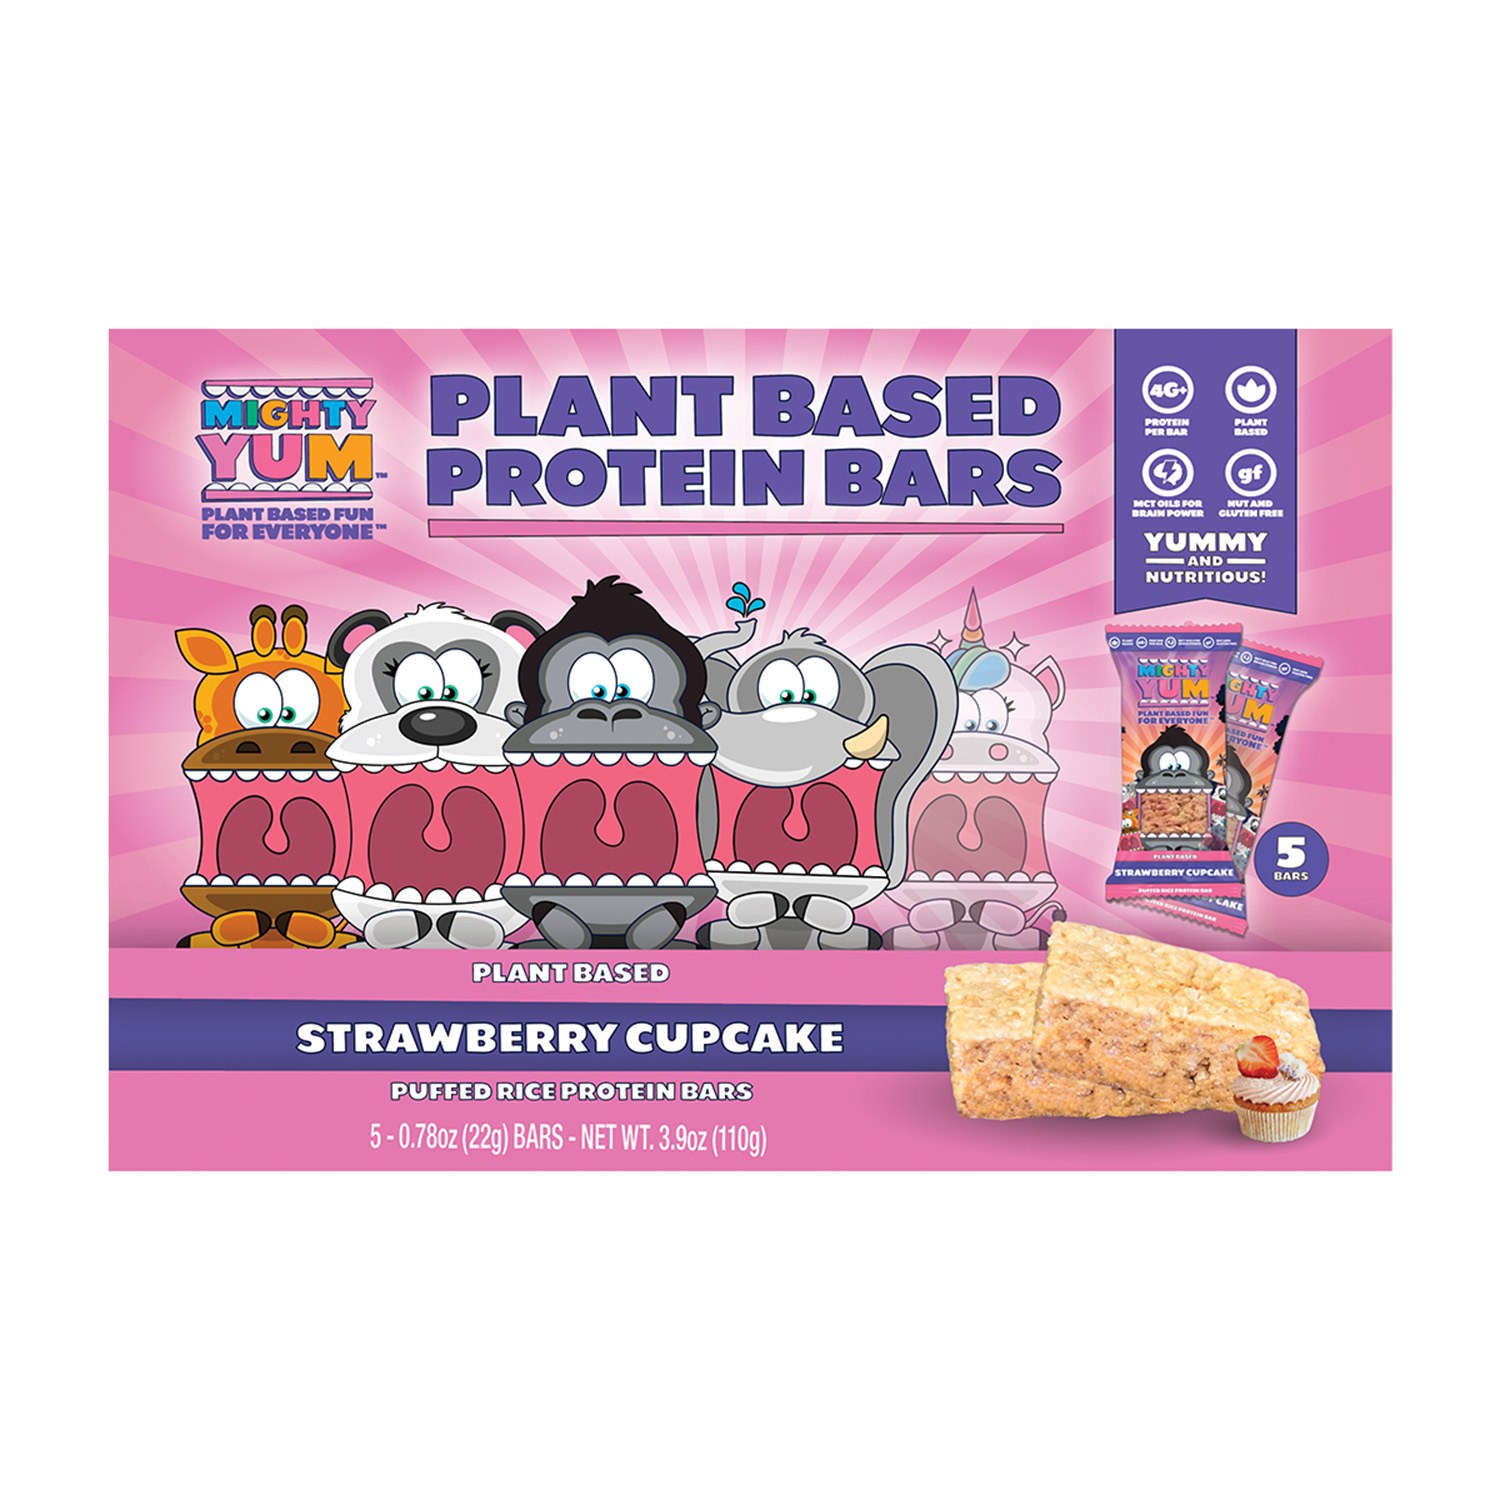 Mighty Yum Sales Box of 5 Units - Plant-Based Strawberry Cupcake Protein Bar 24 units per case 5.0 oz